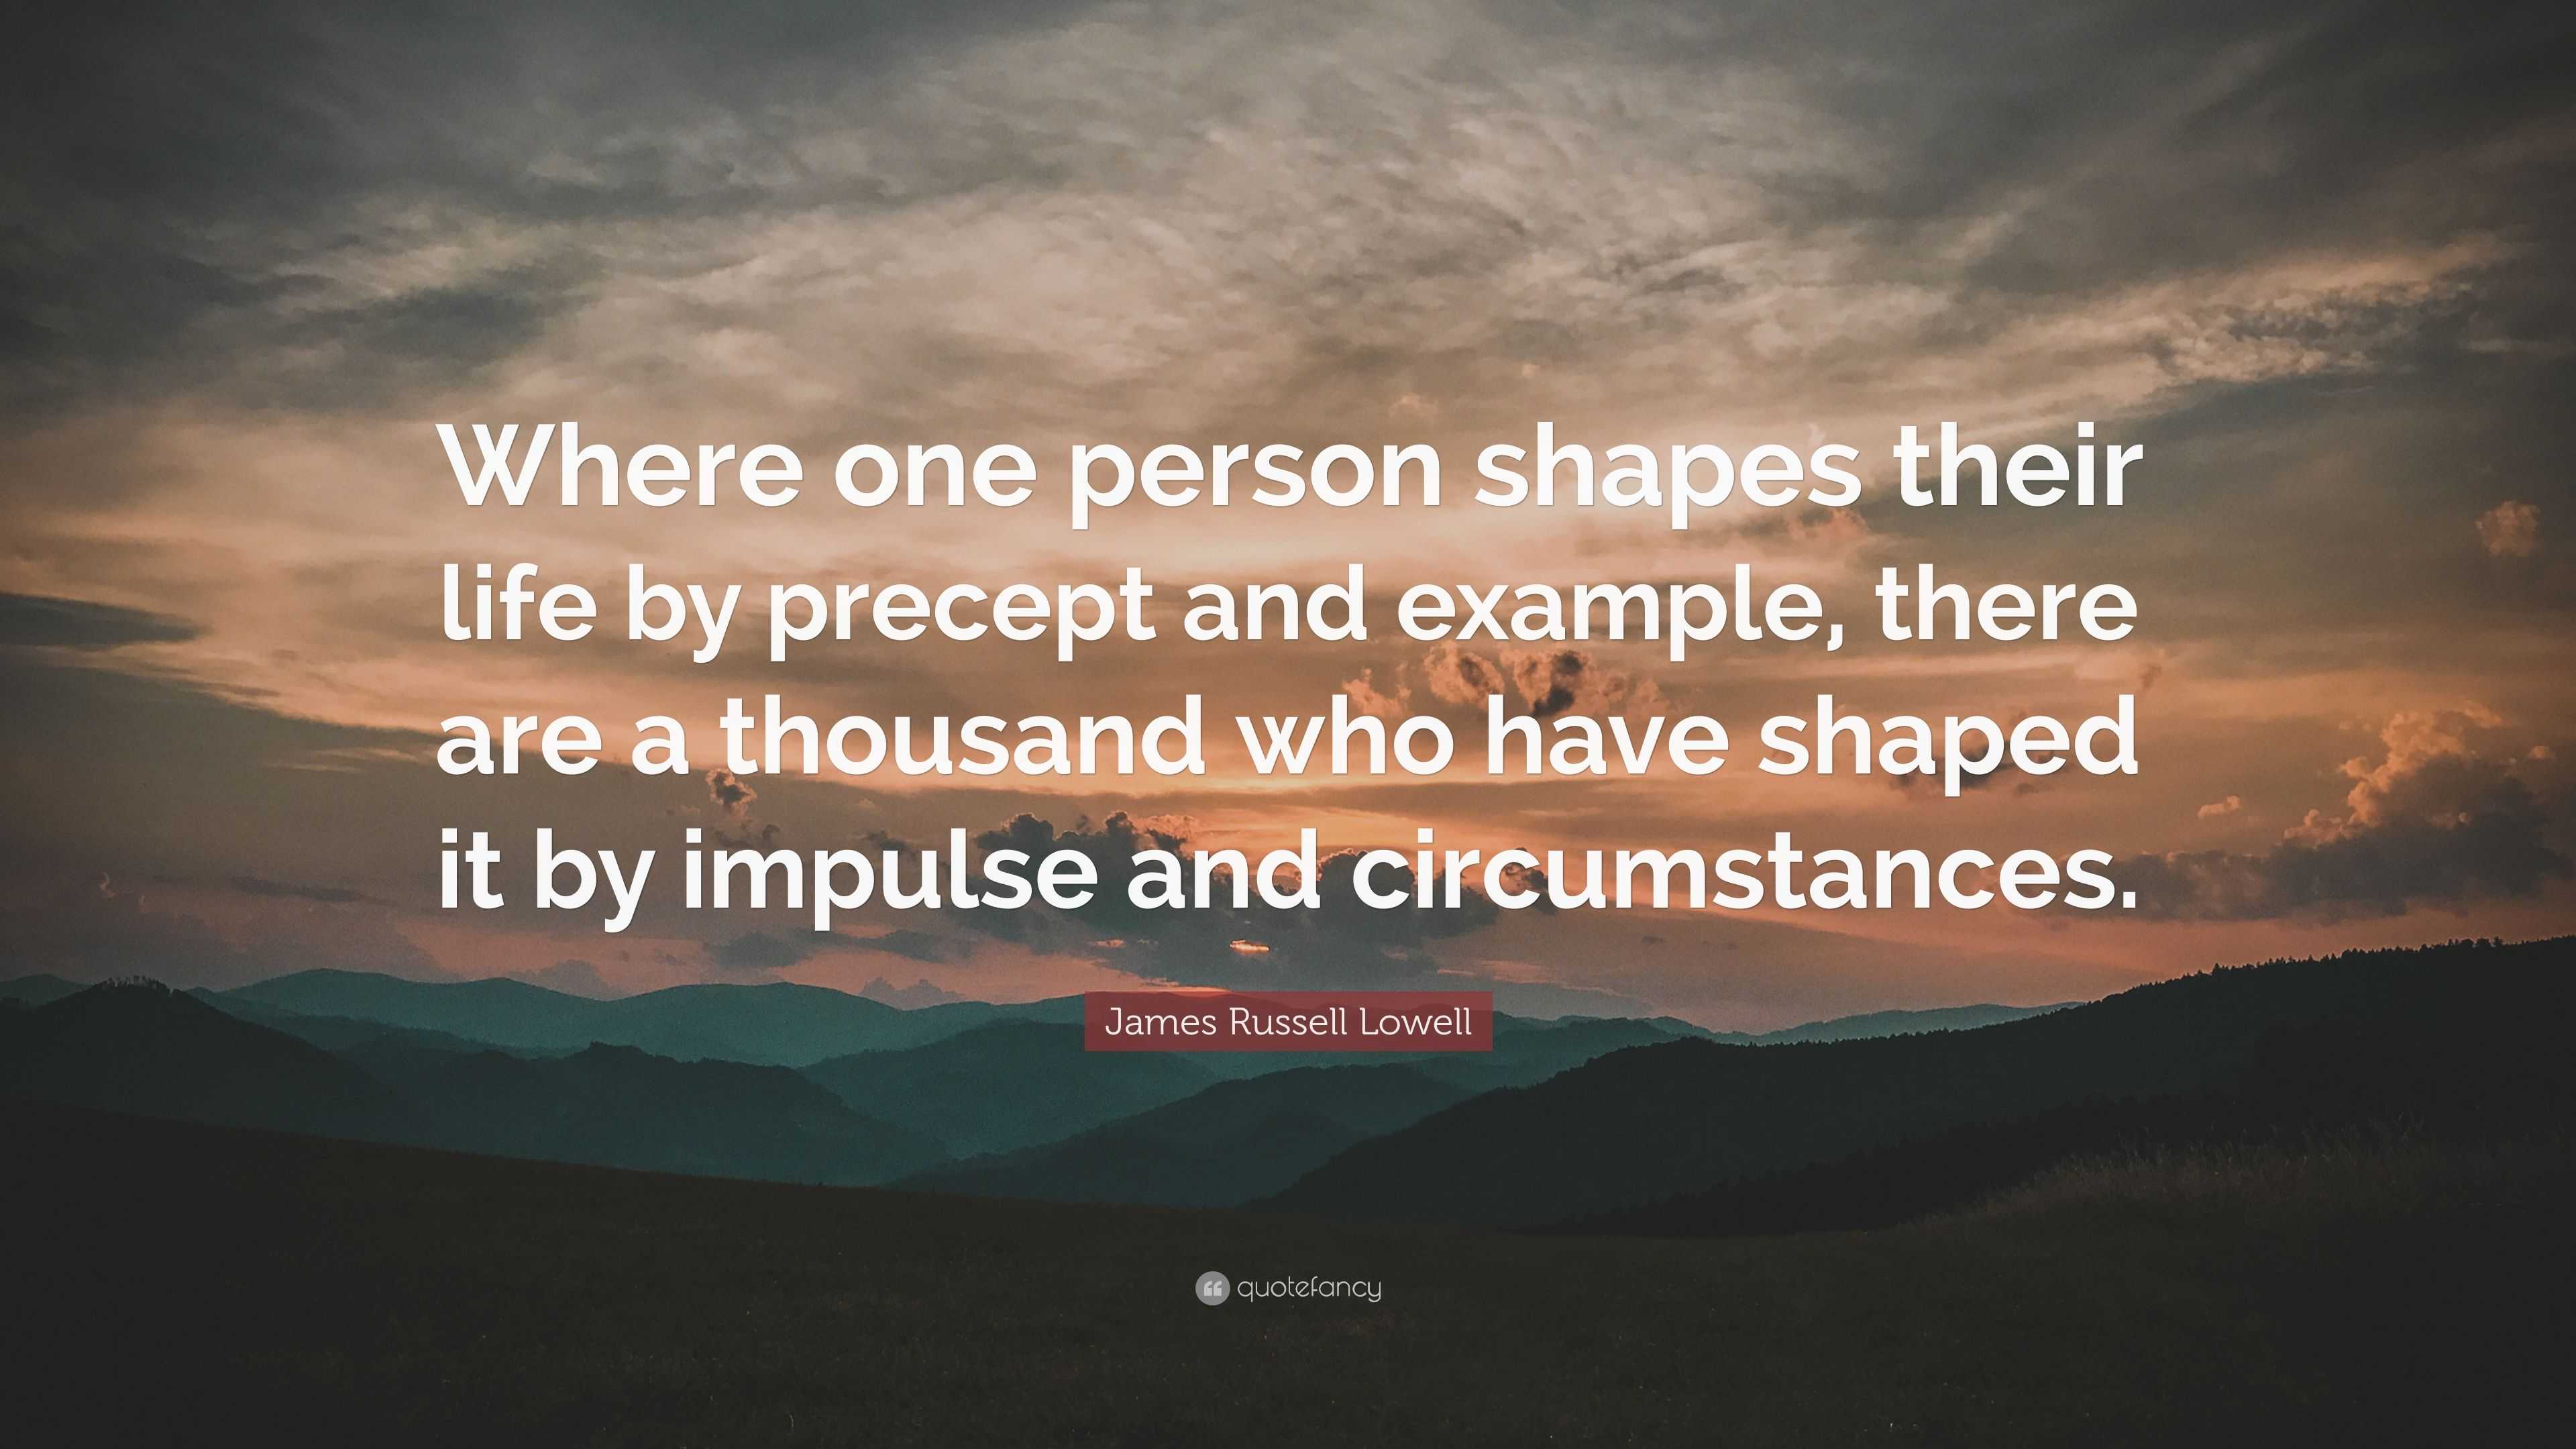 James Russell Lowell Quote: “Where one person shapes their life by ...